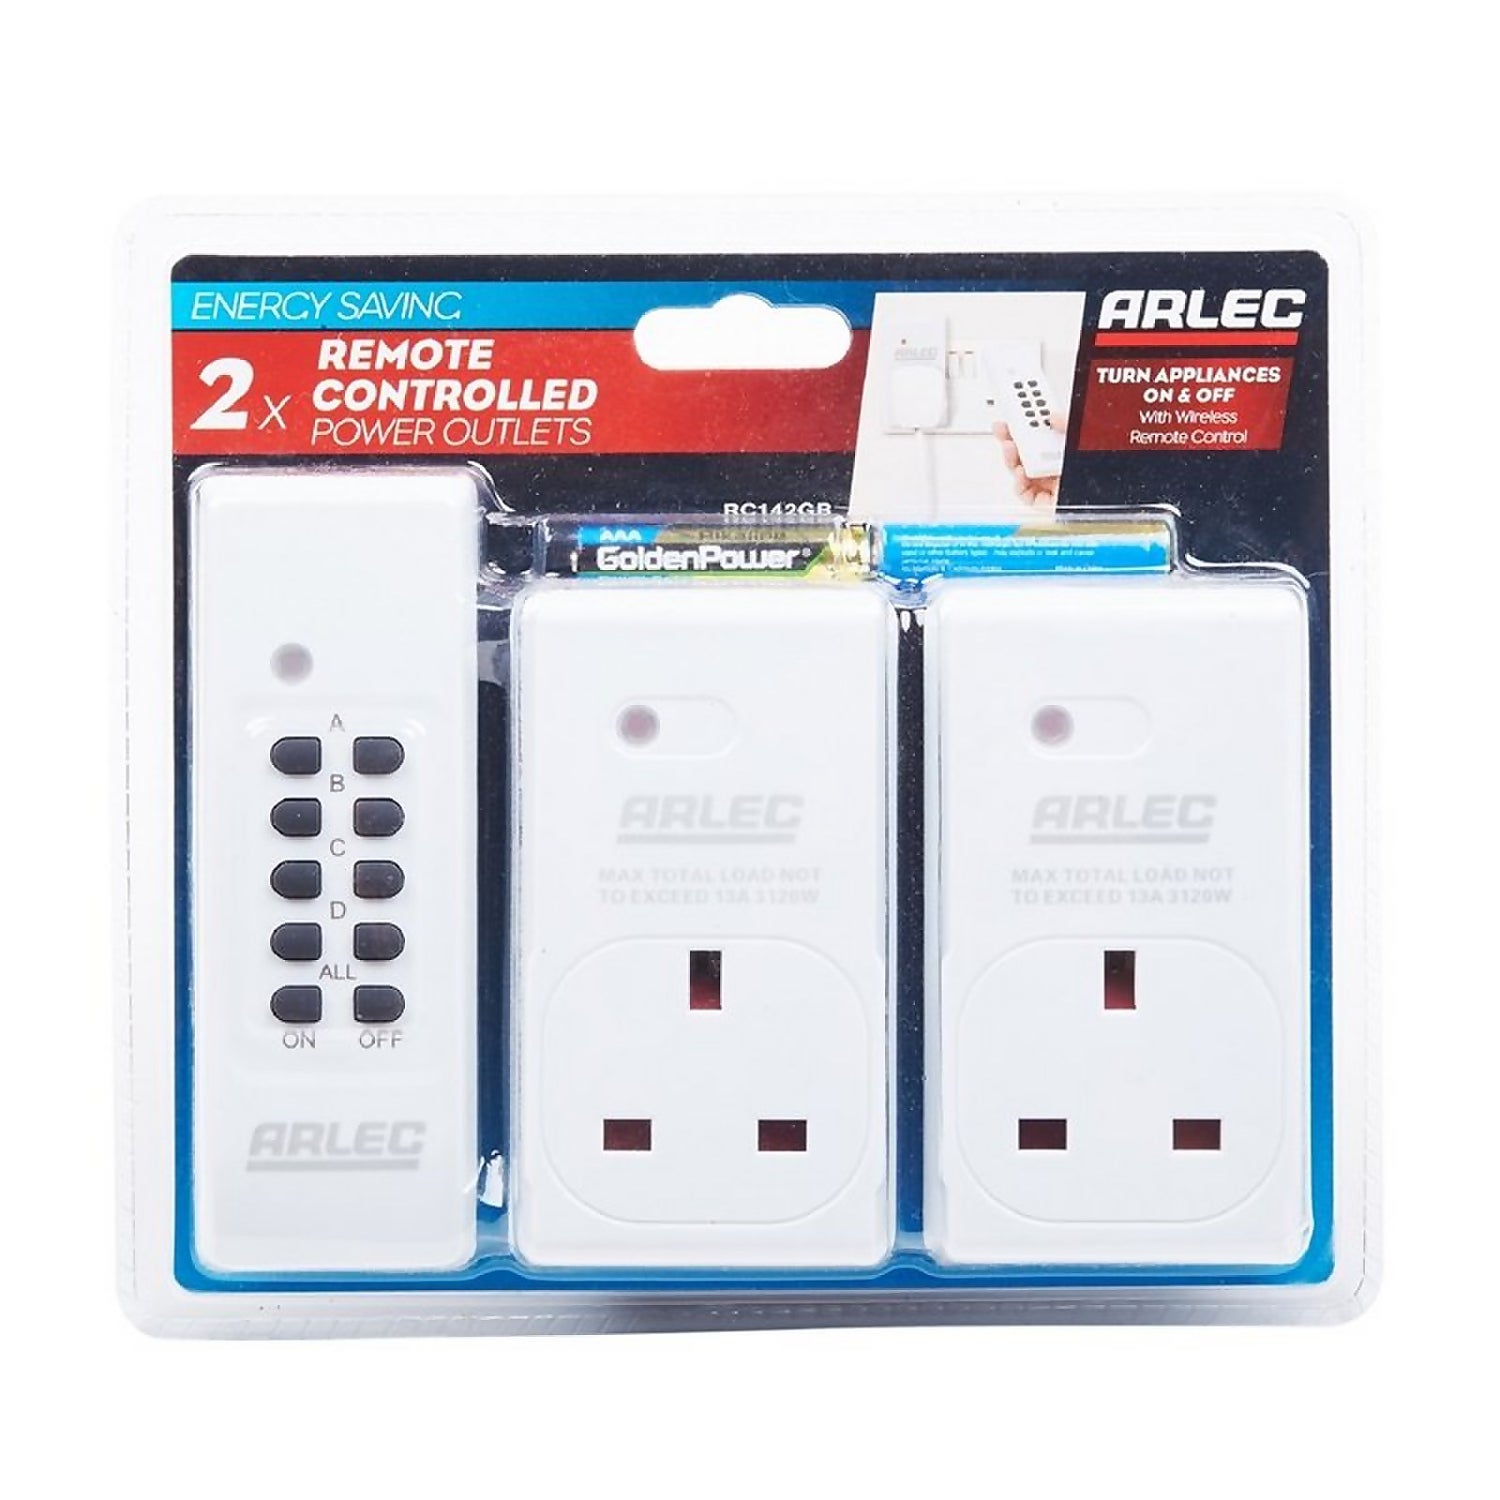 BLACK+DECKER Wireless Remote Control Outlets White/Mat Remote Control Outlet  in the Lamp & Light Controls department at